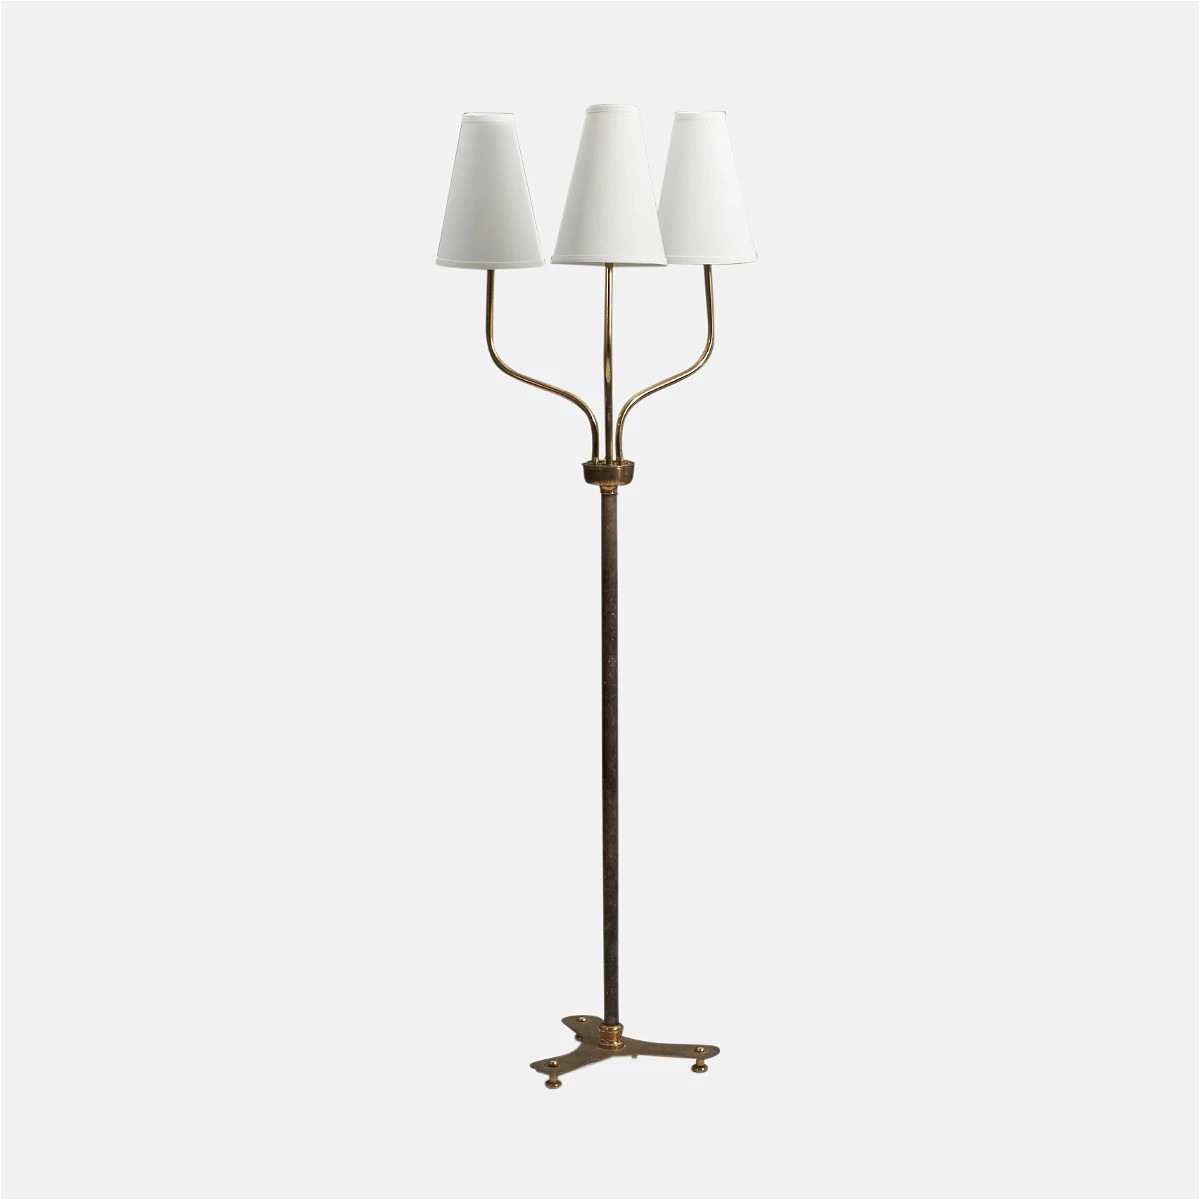 a floor lamp with three lamps on it